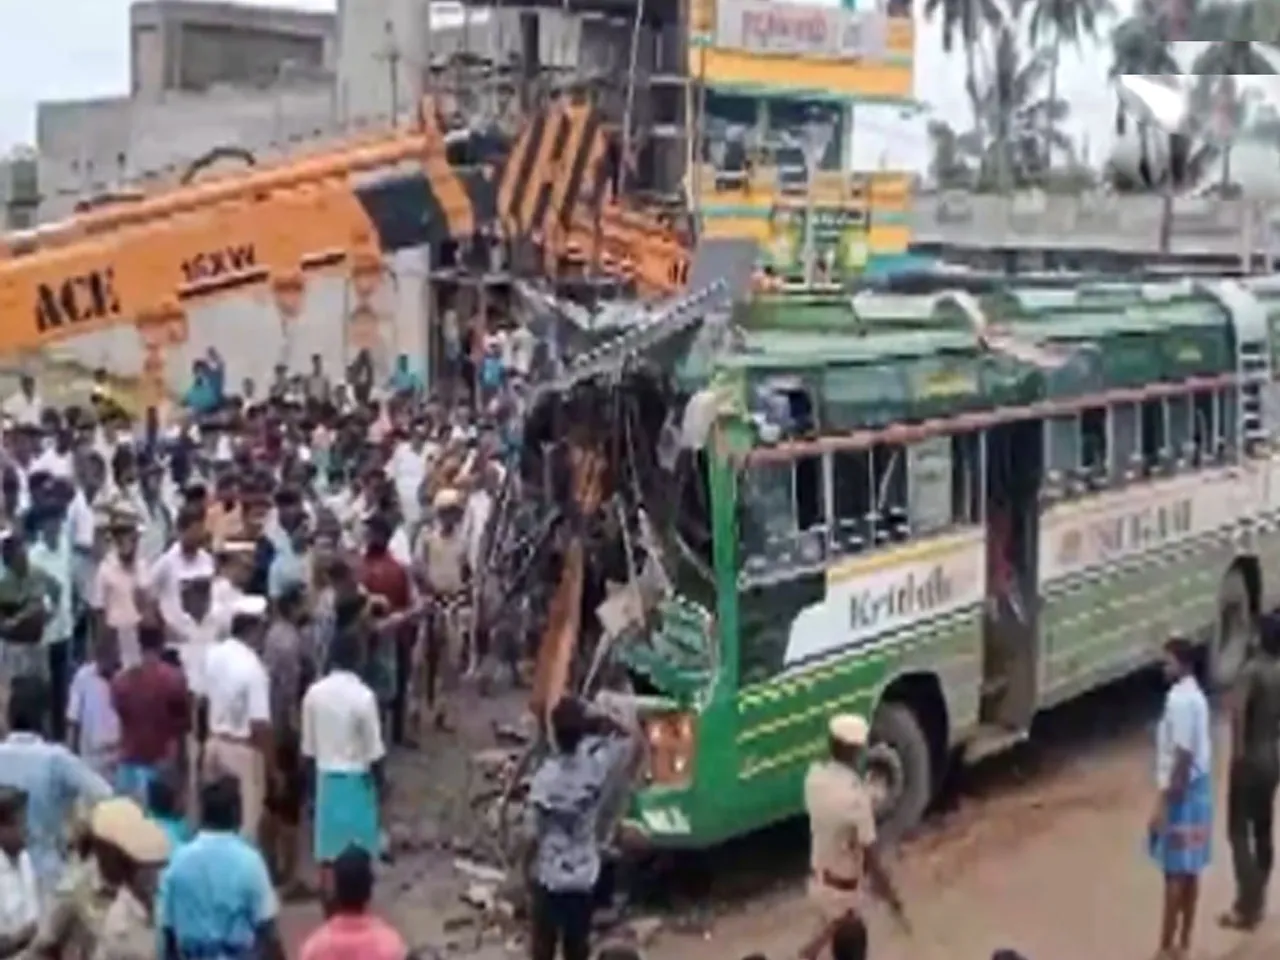 70 people were injured when two private buses collided